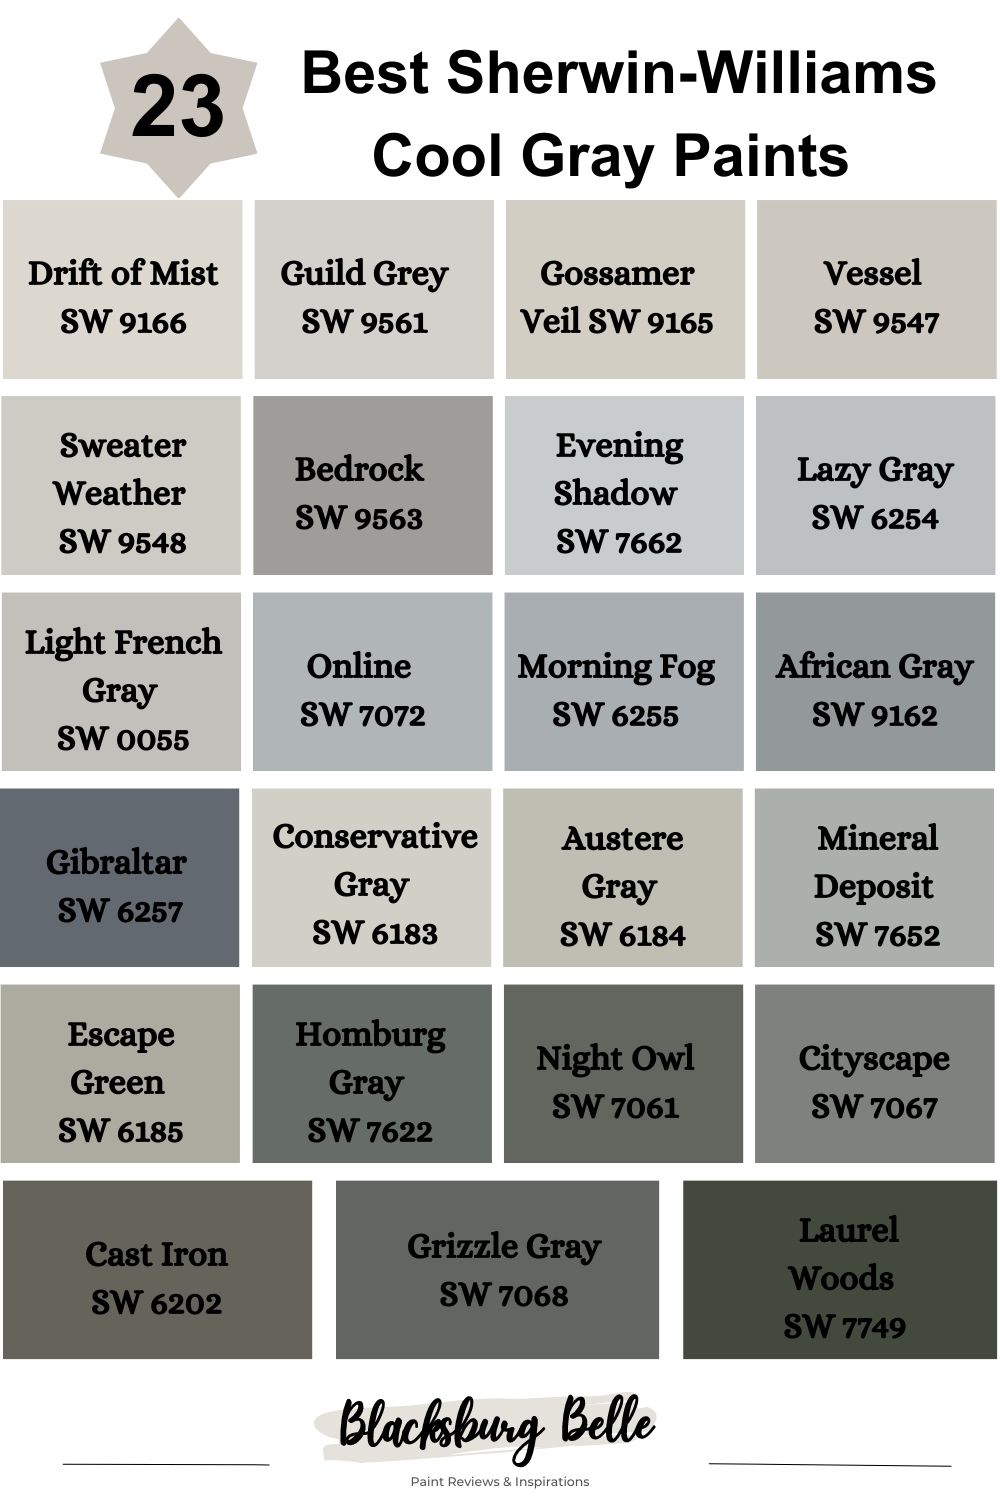 23 Best Sherwin-Williams Cool Gray Paints (Trend 2023)